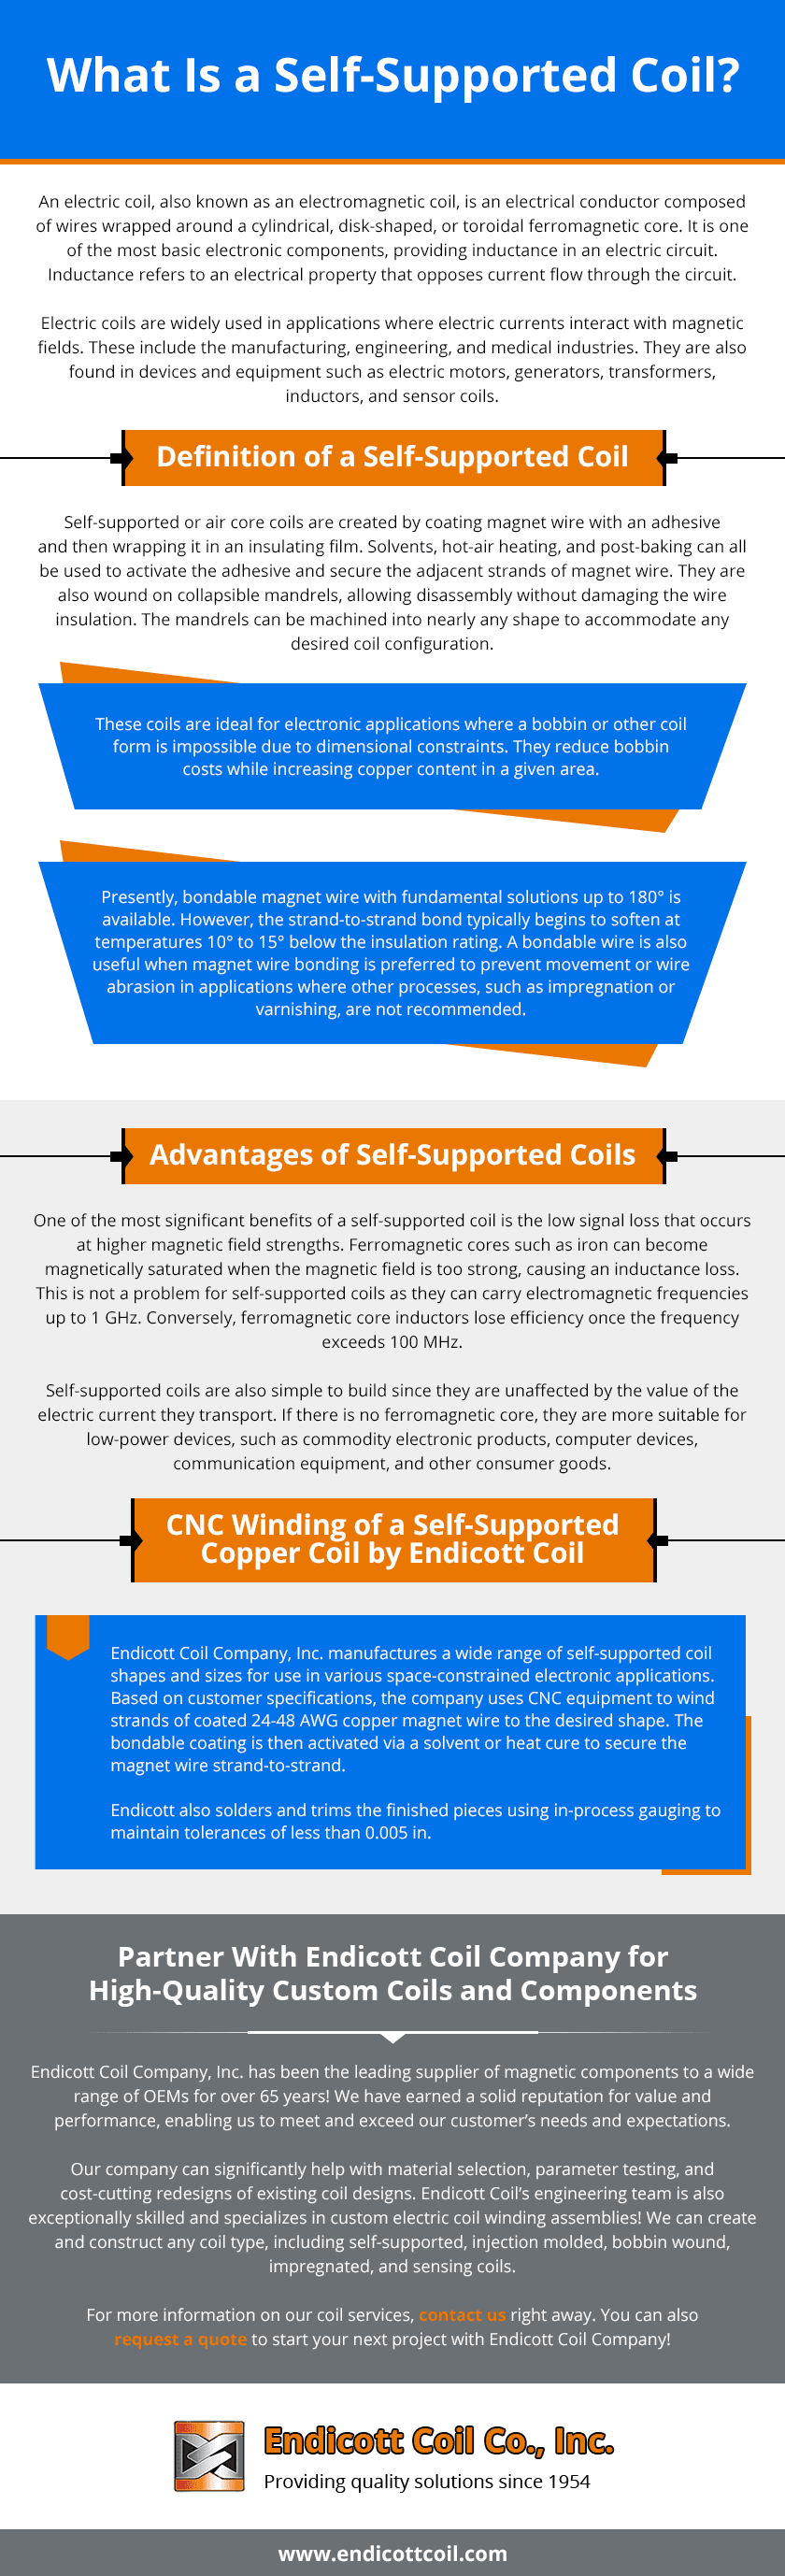 What-Is-a-Self-Supported-Coil